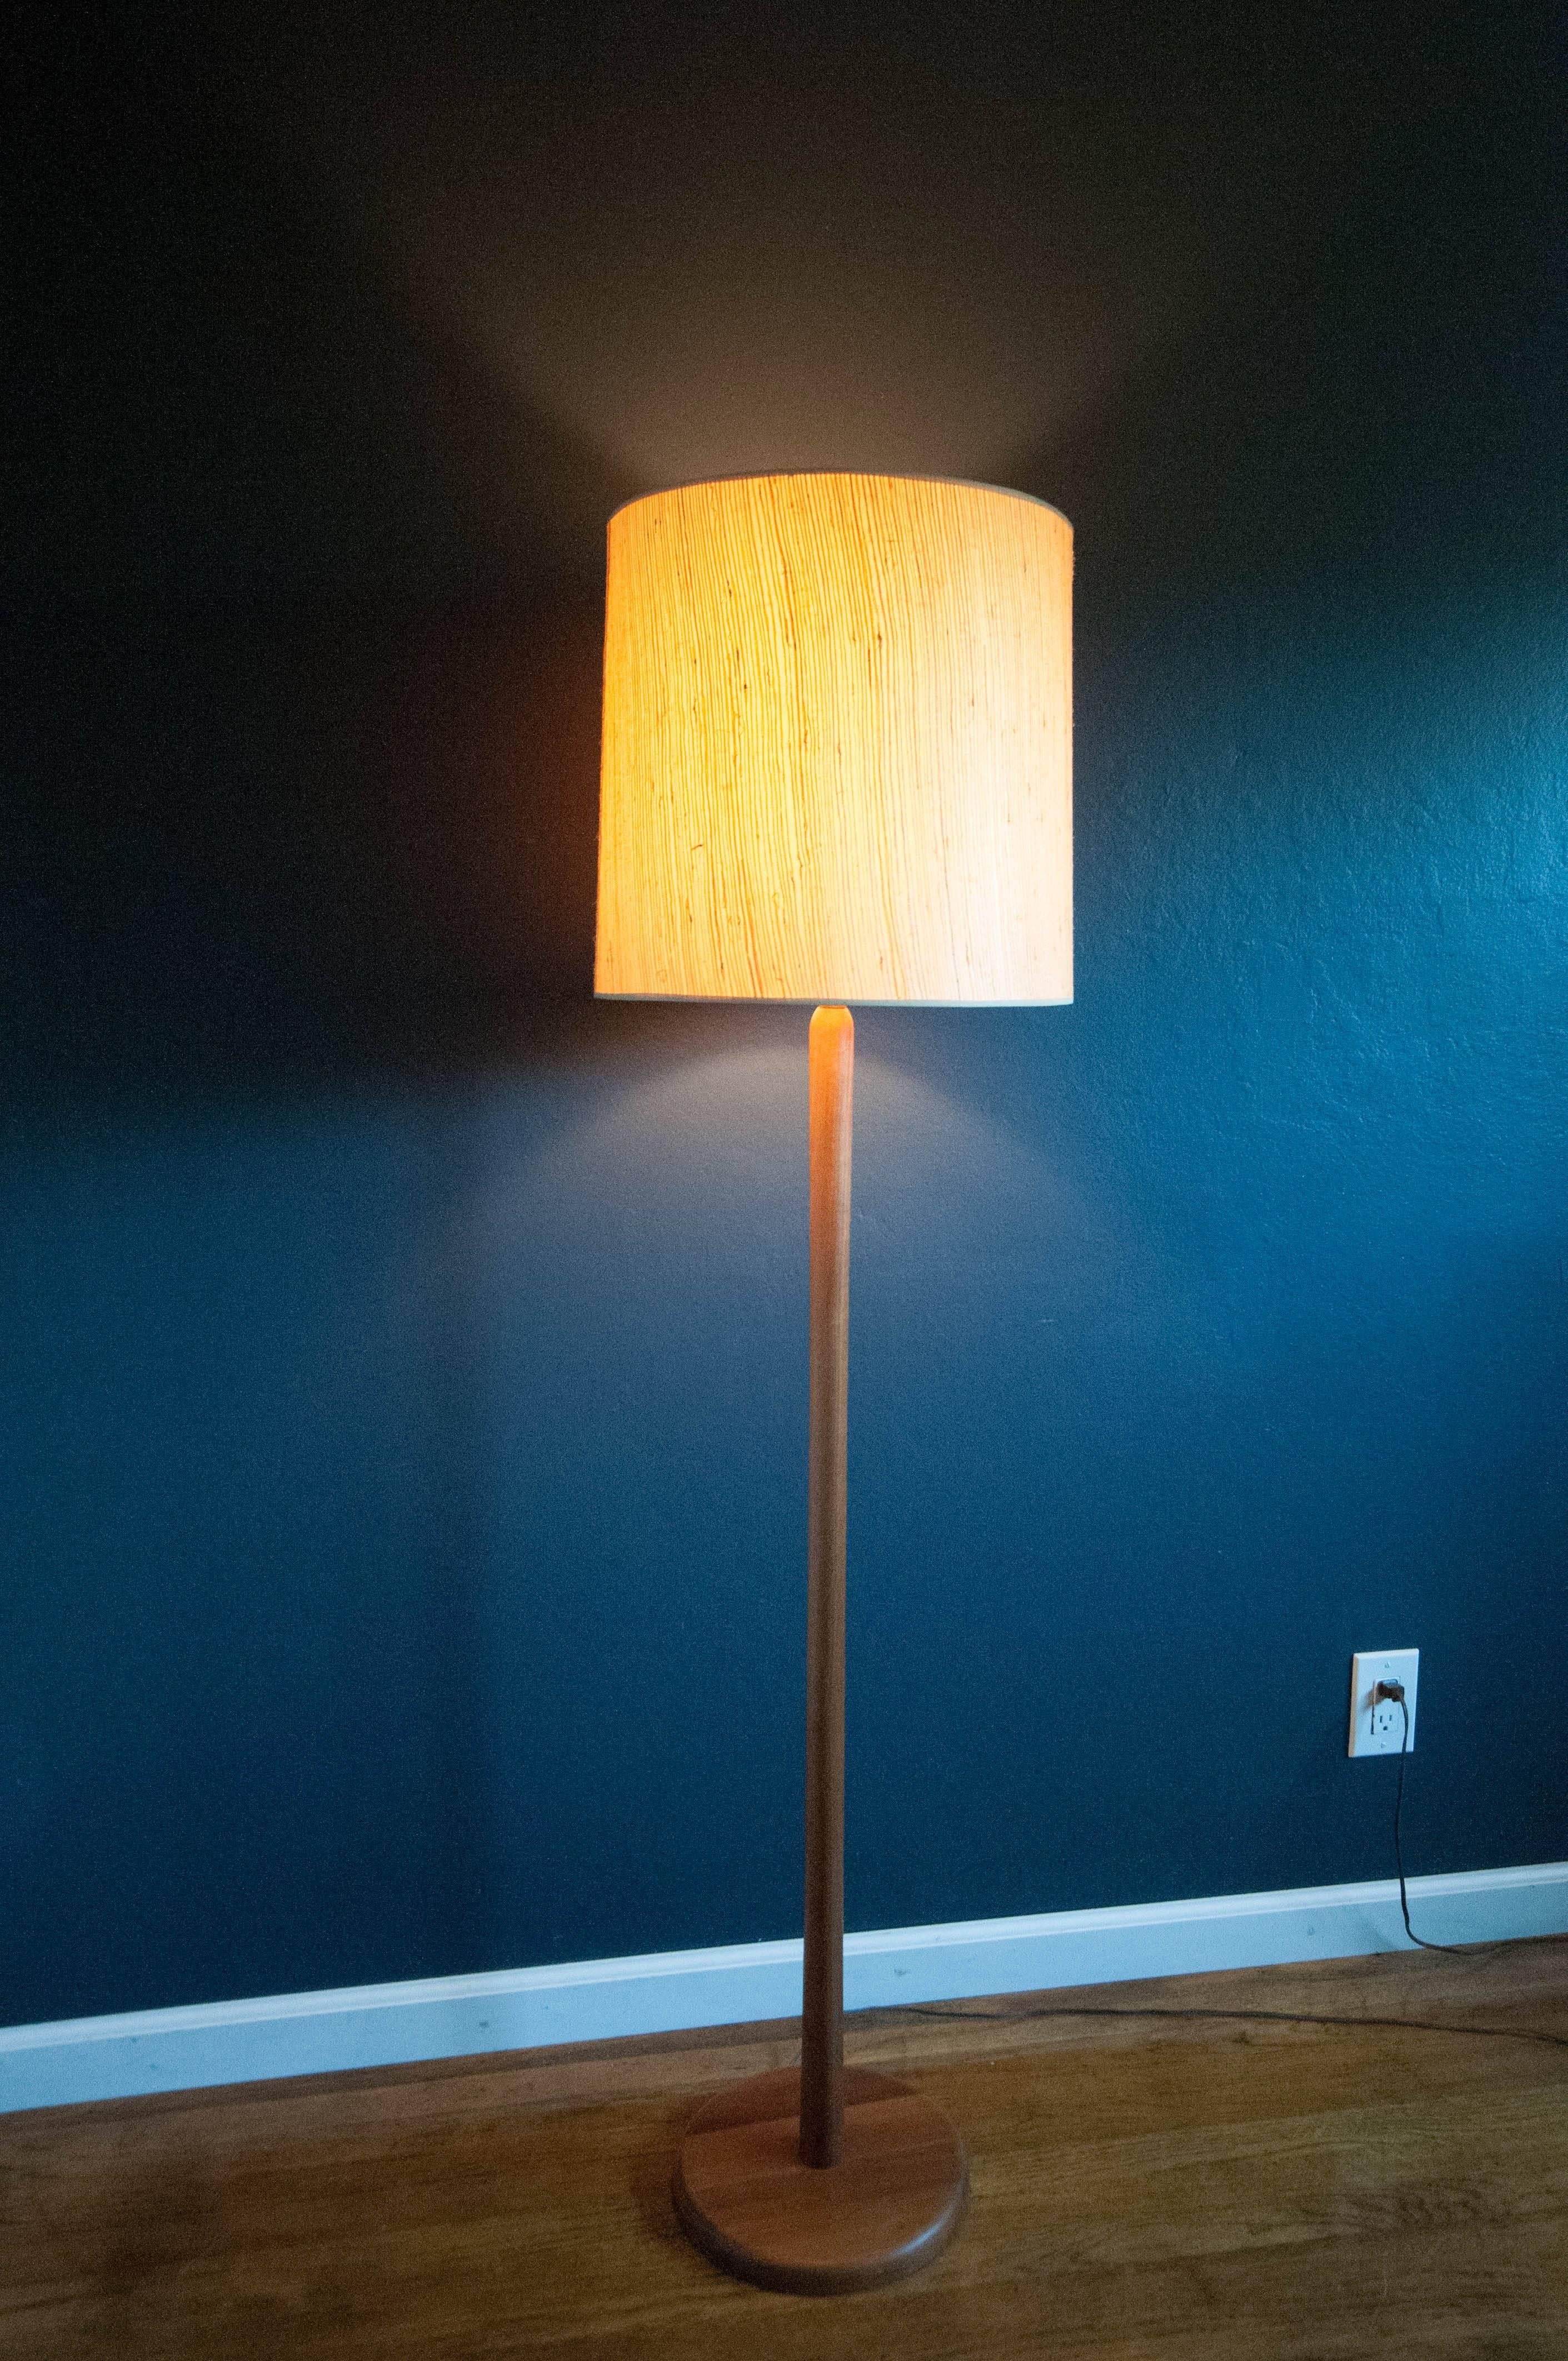 Mid-Century Modern walnut floor Lamp designed by Jane and Gordon Martz for Marshall Studios. Features a three-way switch and includes original grasscloth shade and wood finial.